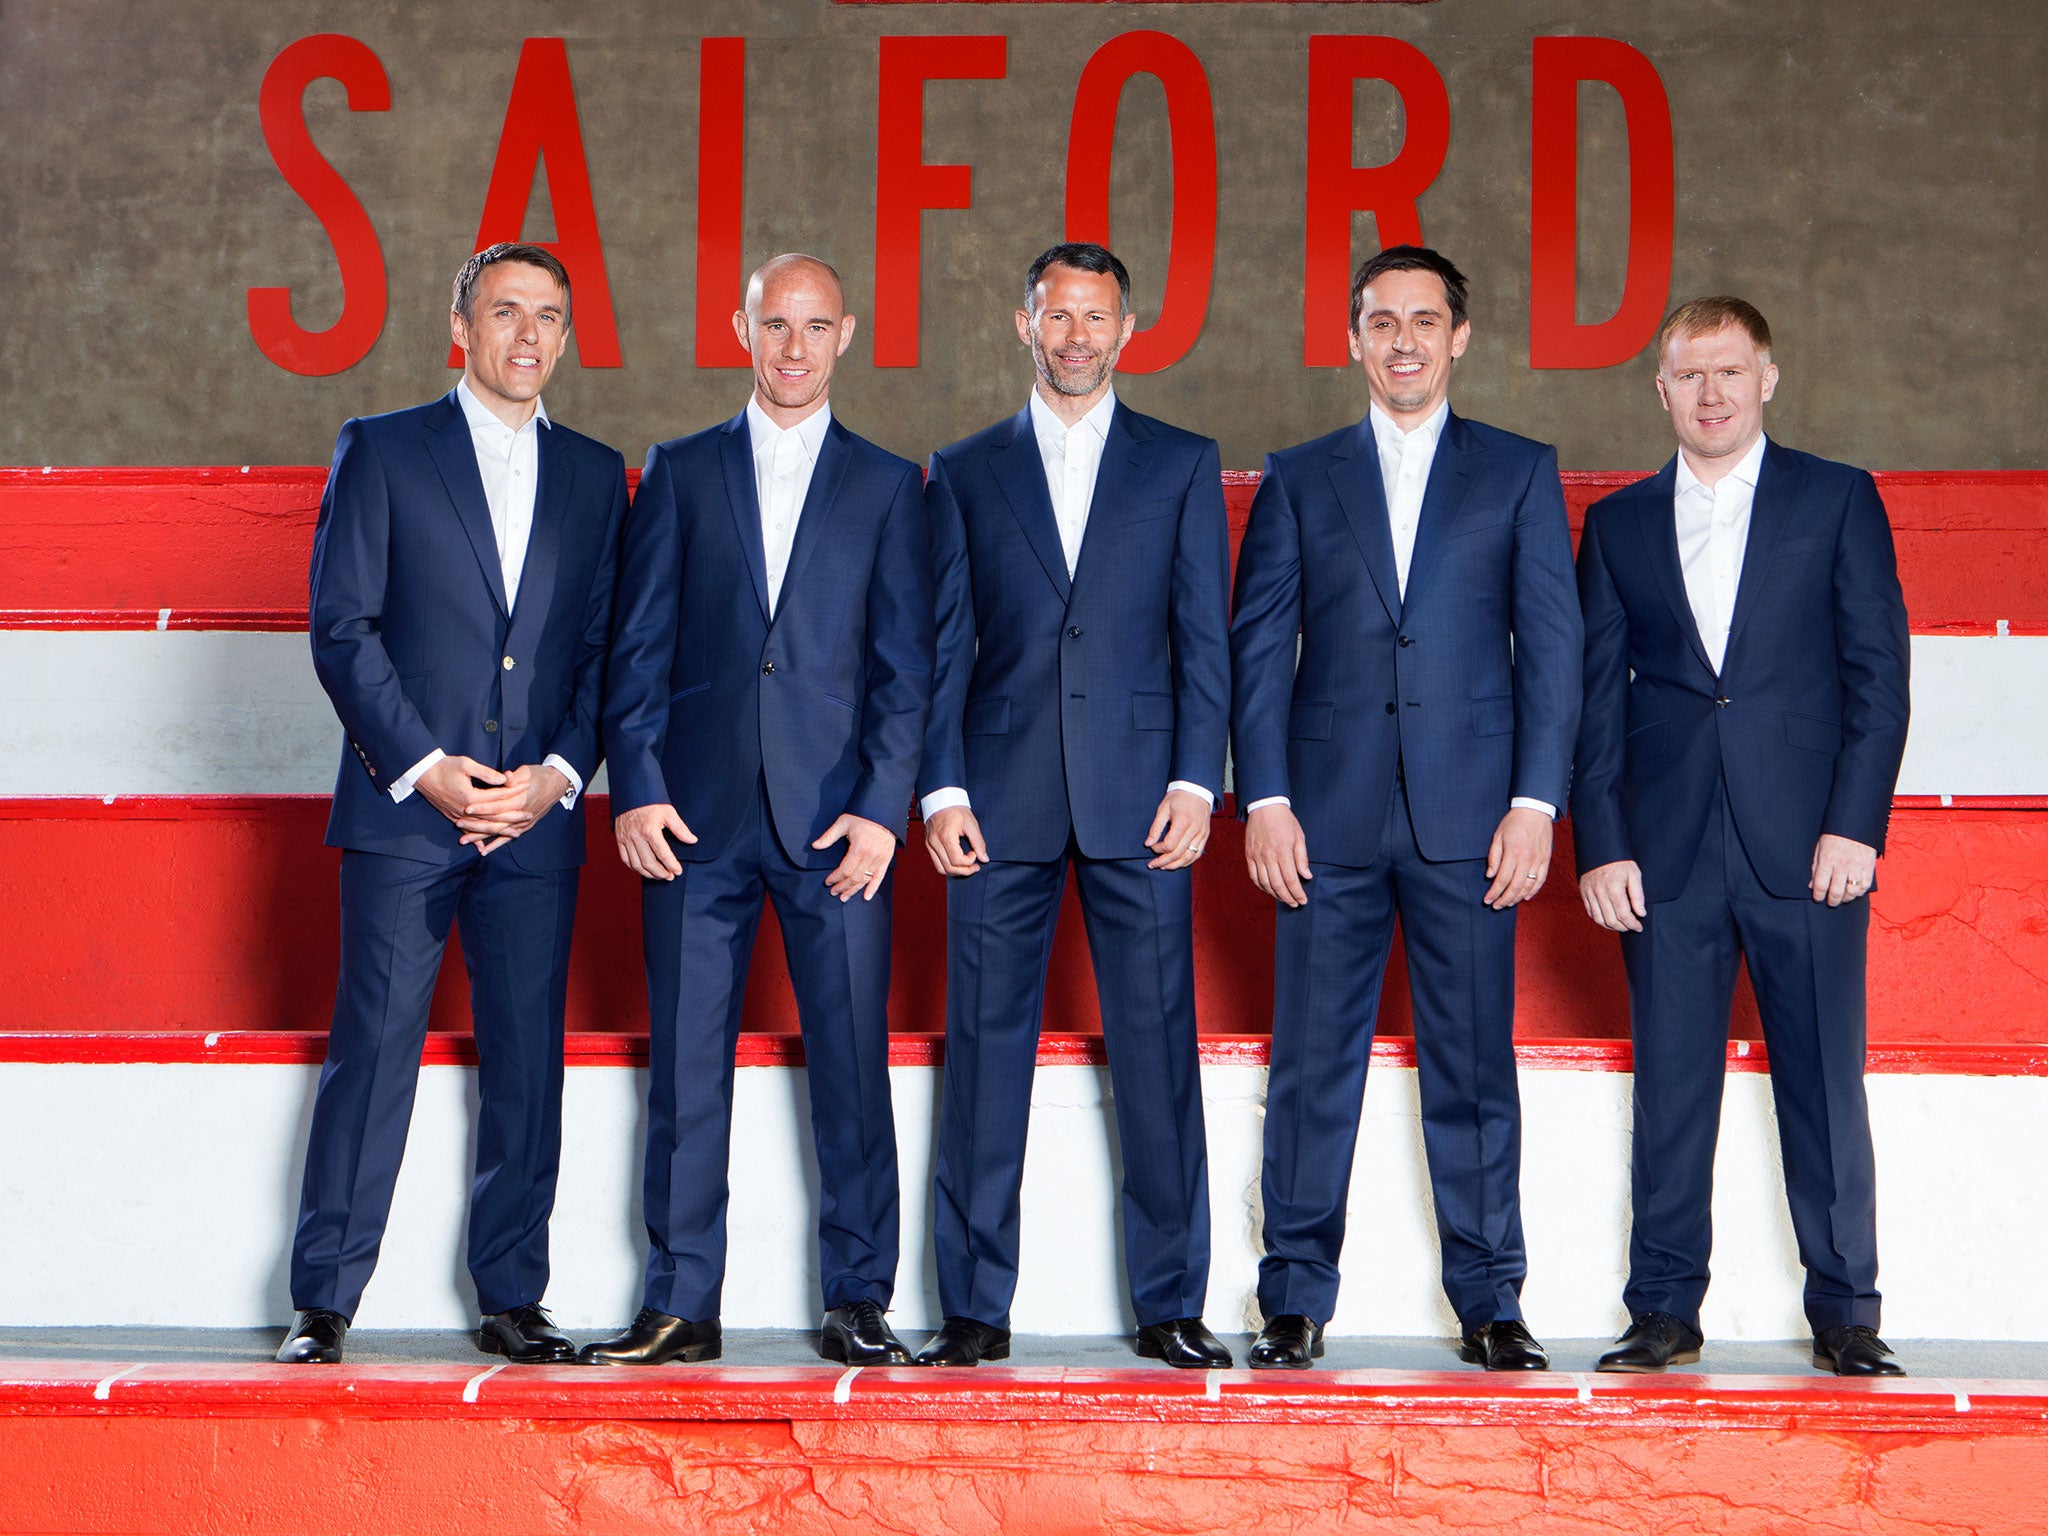 The co-owners of Salford City, from left: Phil Neville, Nicky Butt, Ryan Giggs, Gary Neville and Paul Scholes